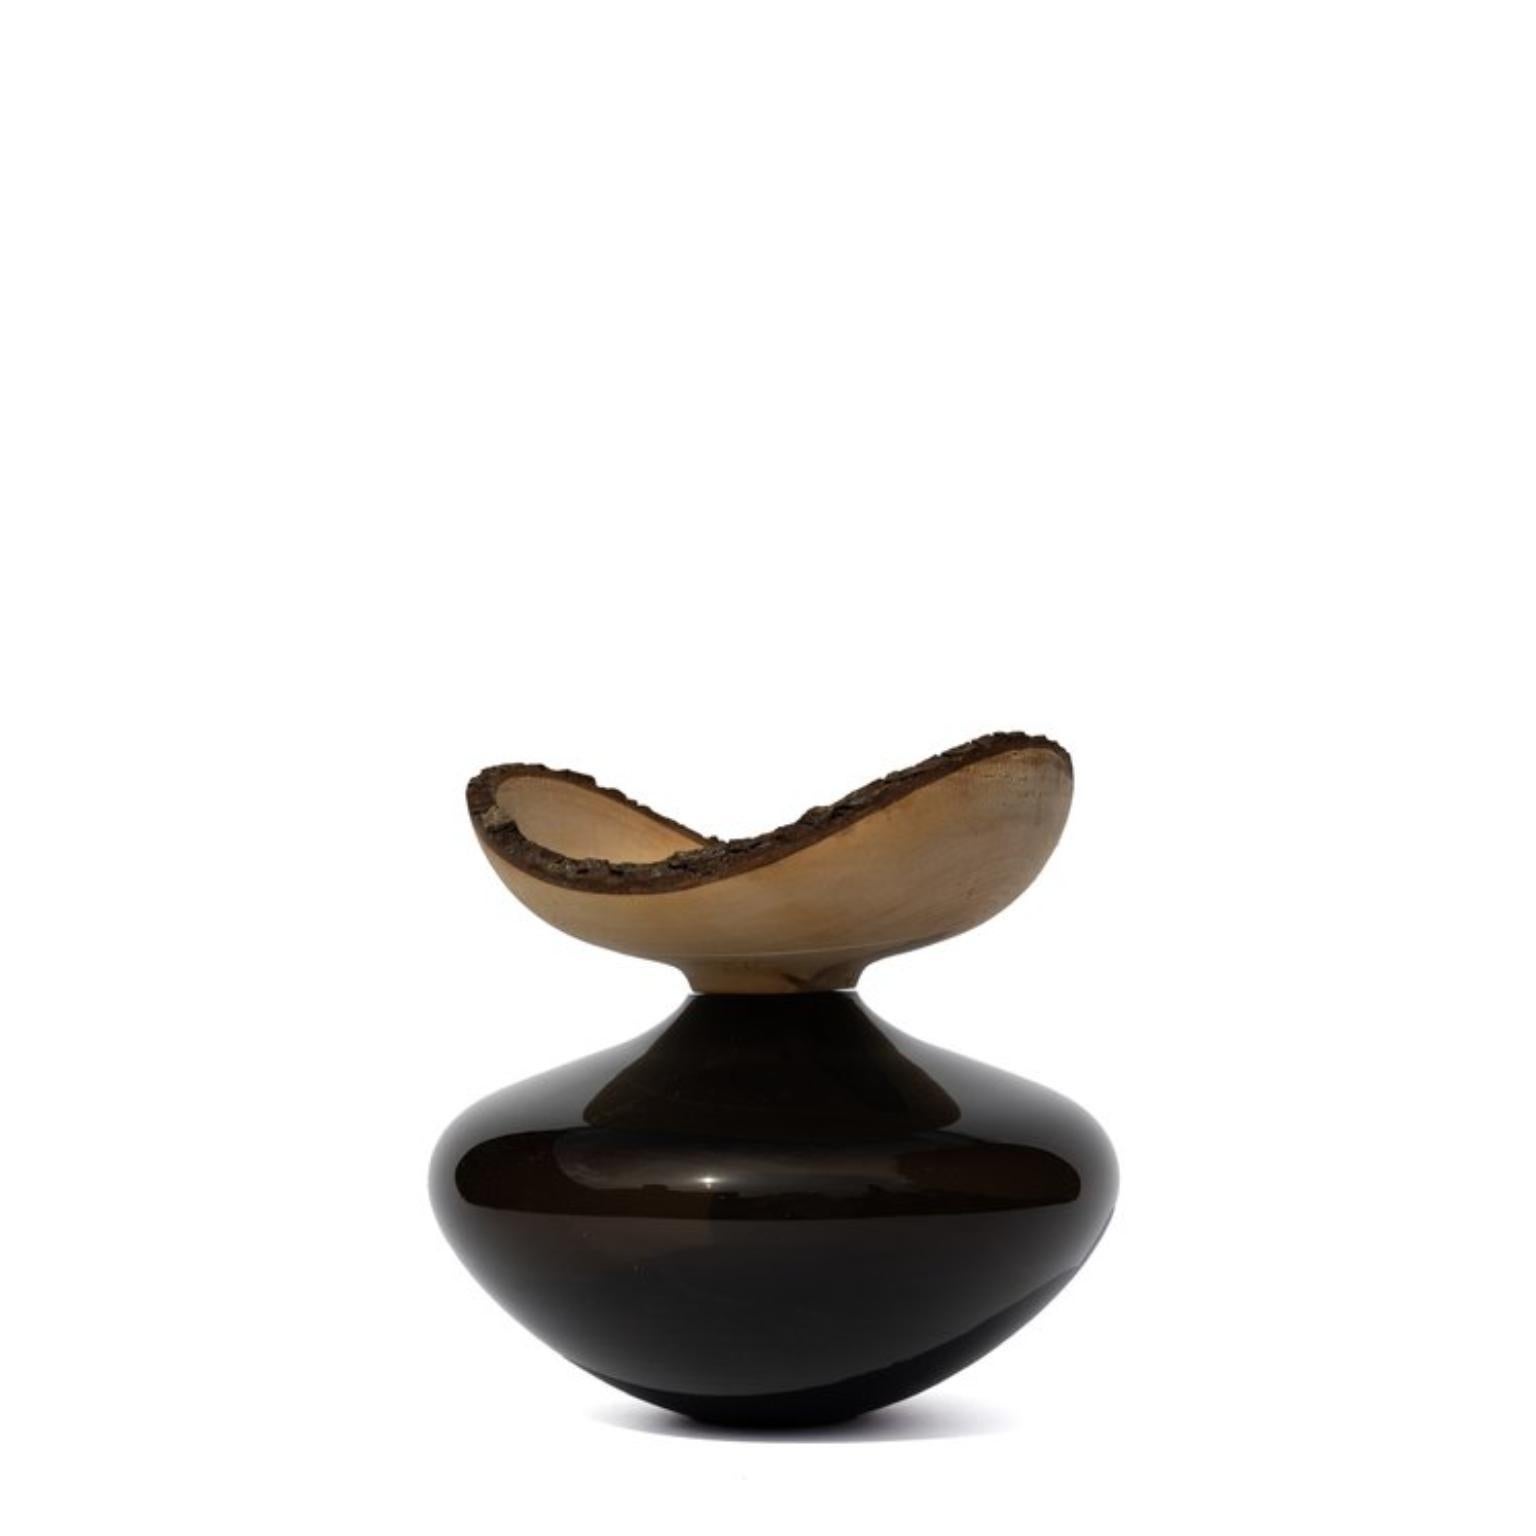 Organic Modern Bloom Stacking Amber Vessel by Pia Wüstenberg For Sale